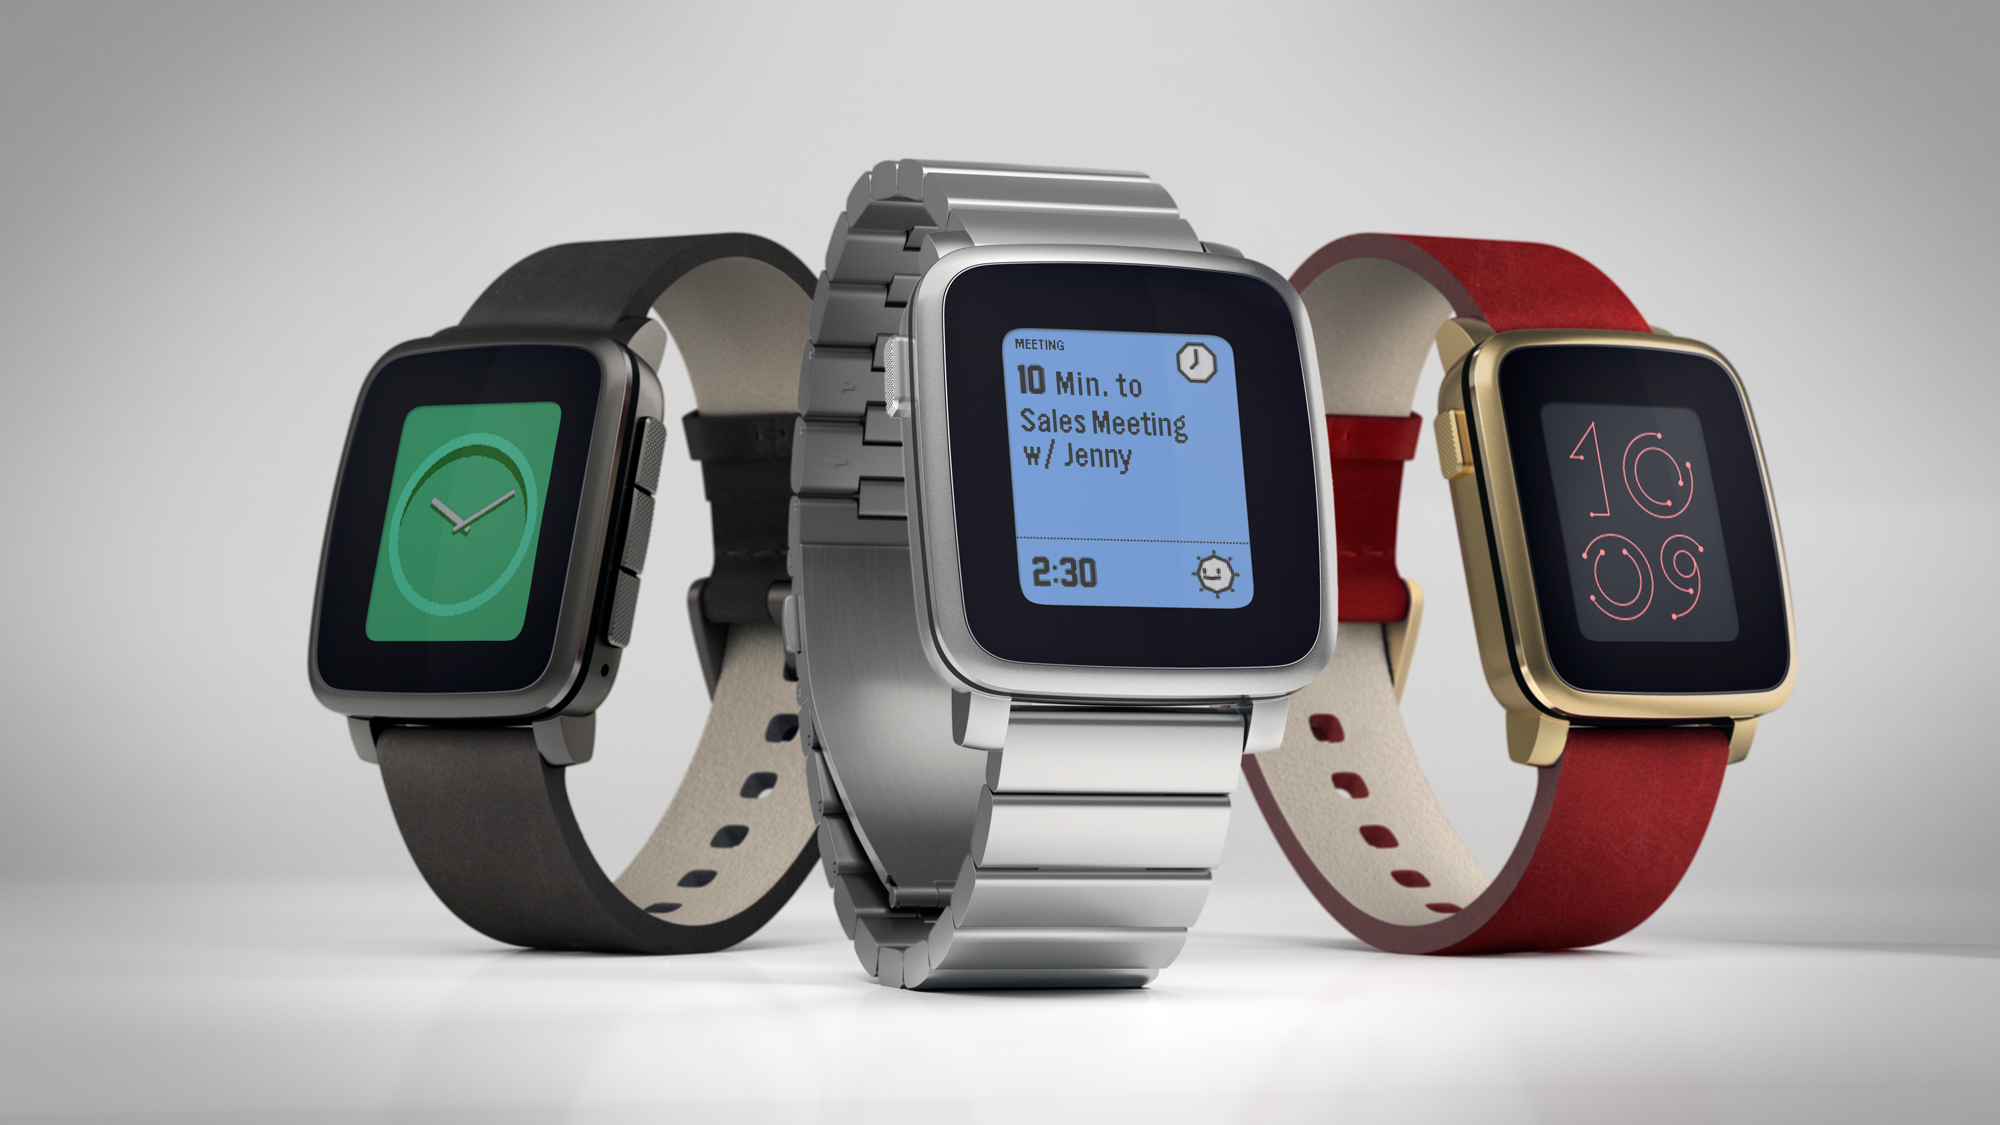 apple watch vs pebble time steel which one should you choose image 7